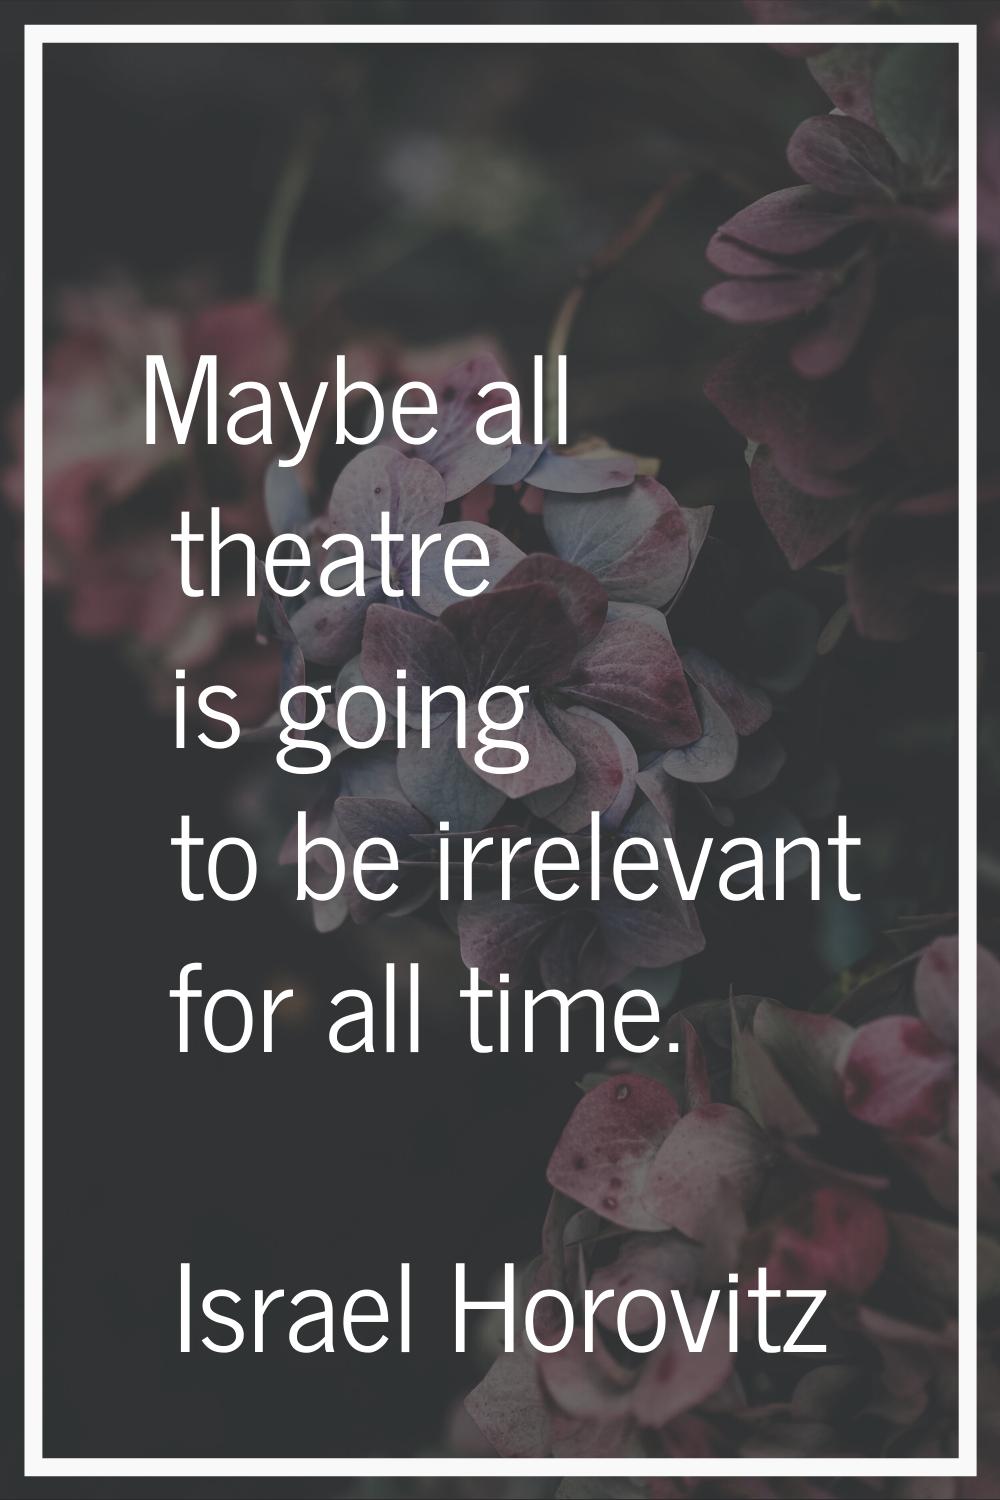 Maybe all theatre is going to be irrelevant for all time.